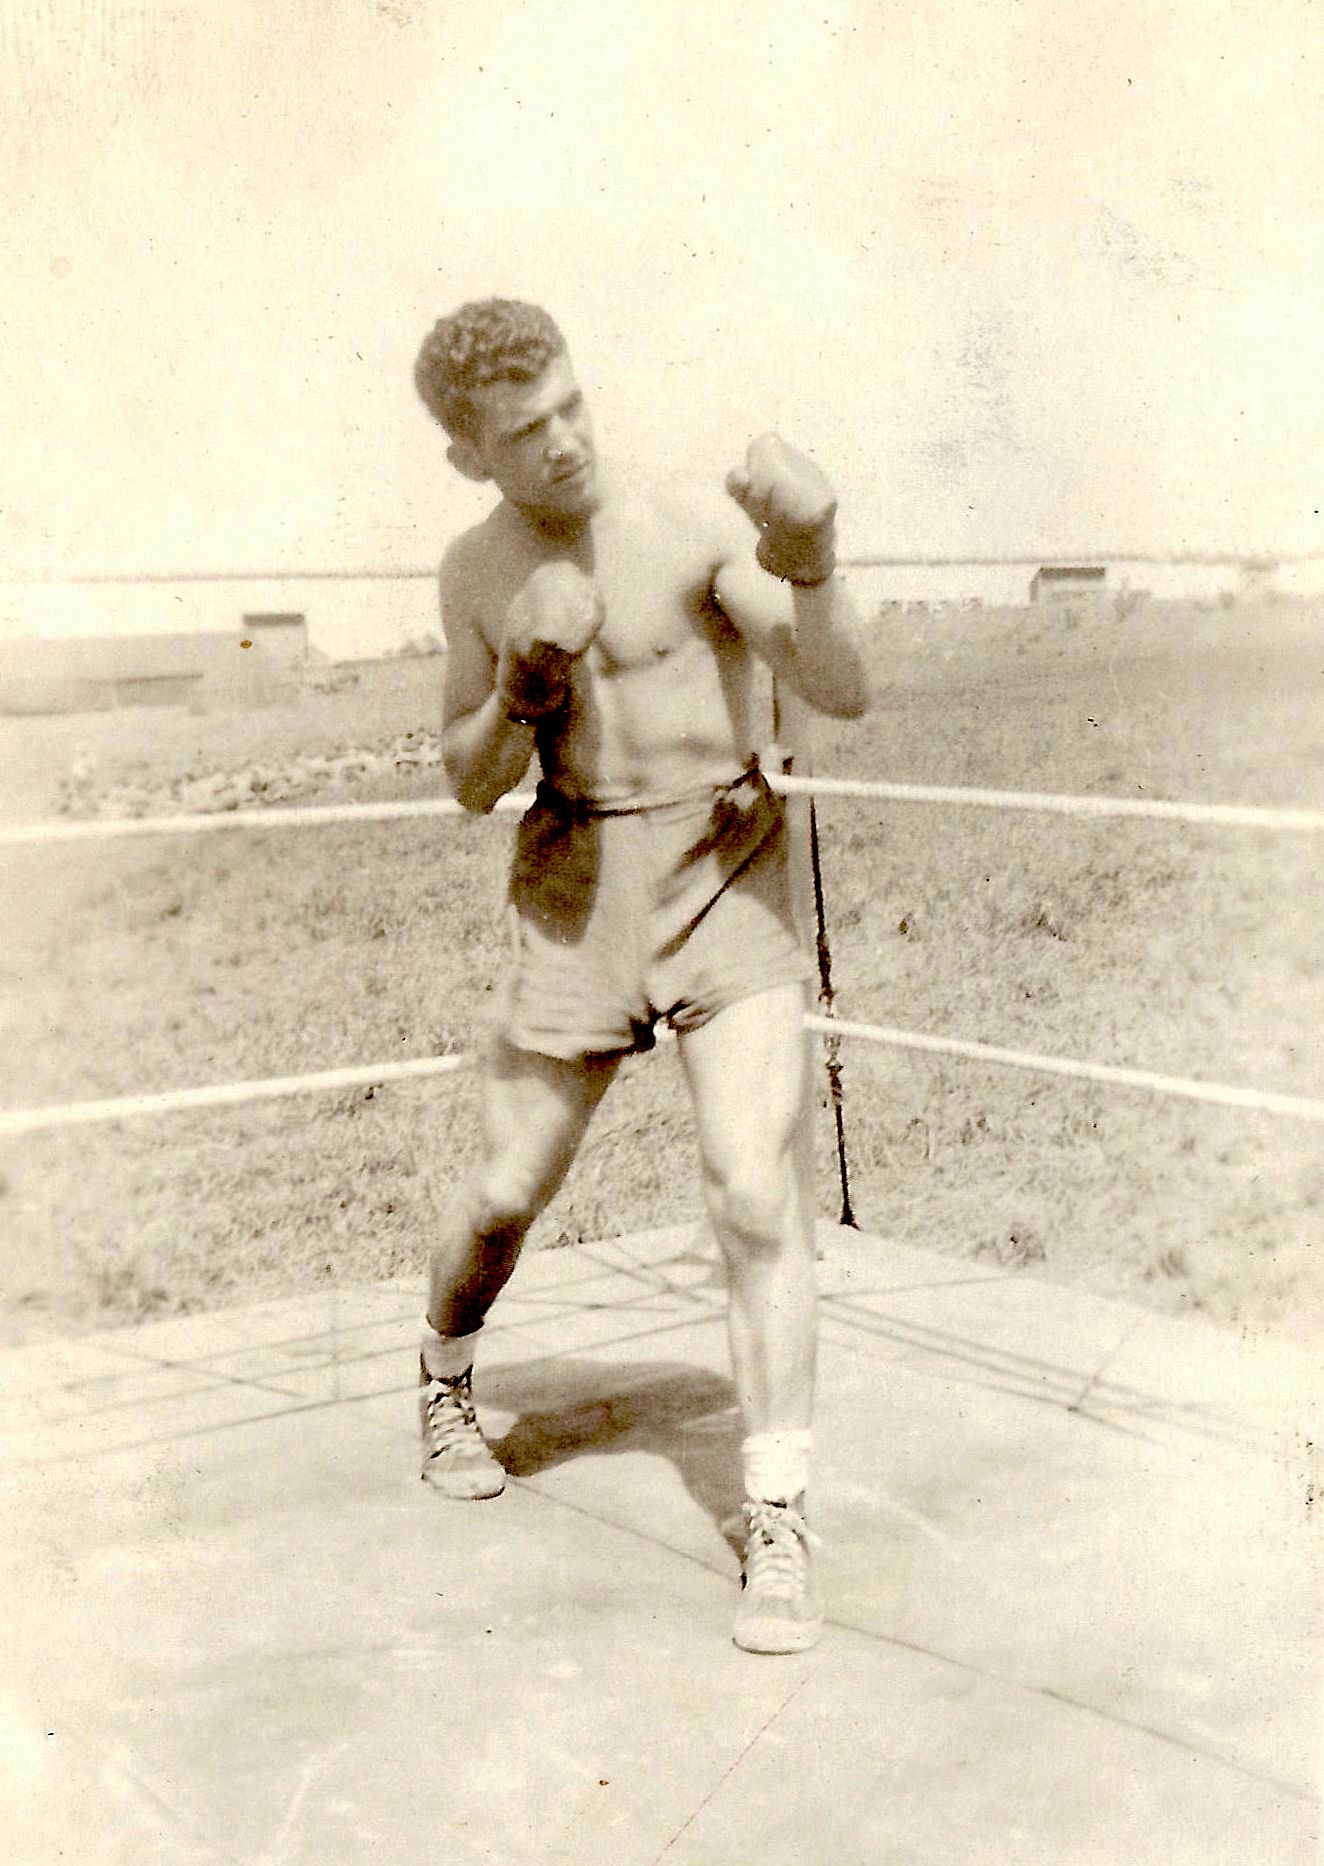 Lou Naccarato in the boxing ring. He was one of the Division champions. Photo courtesy of Brad Logan.